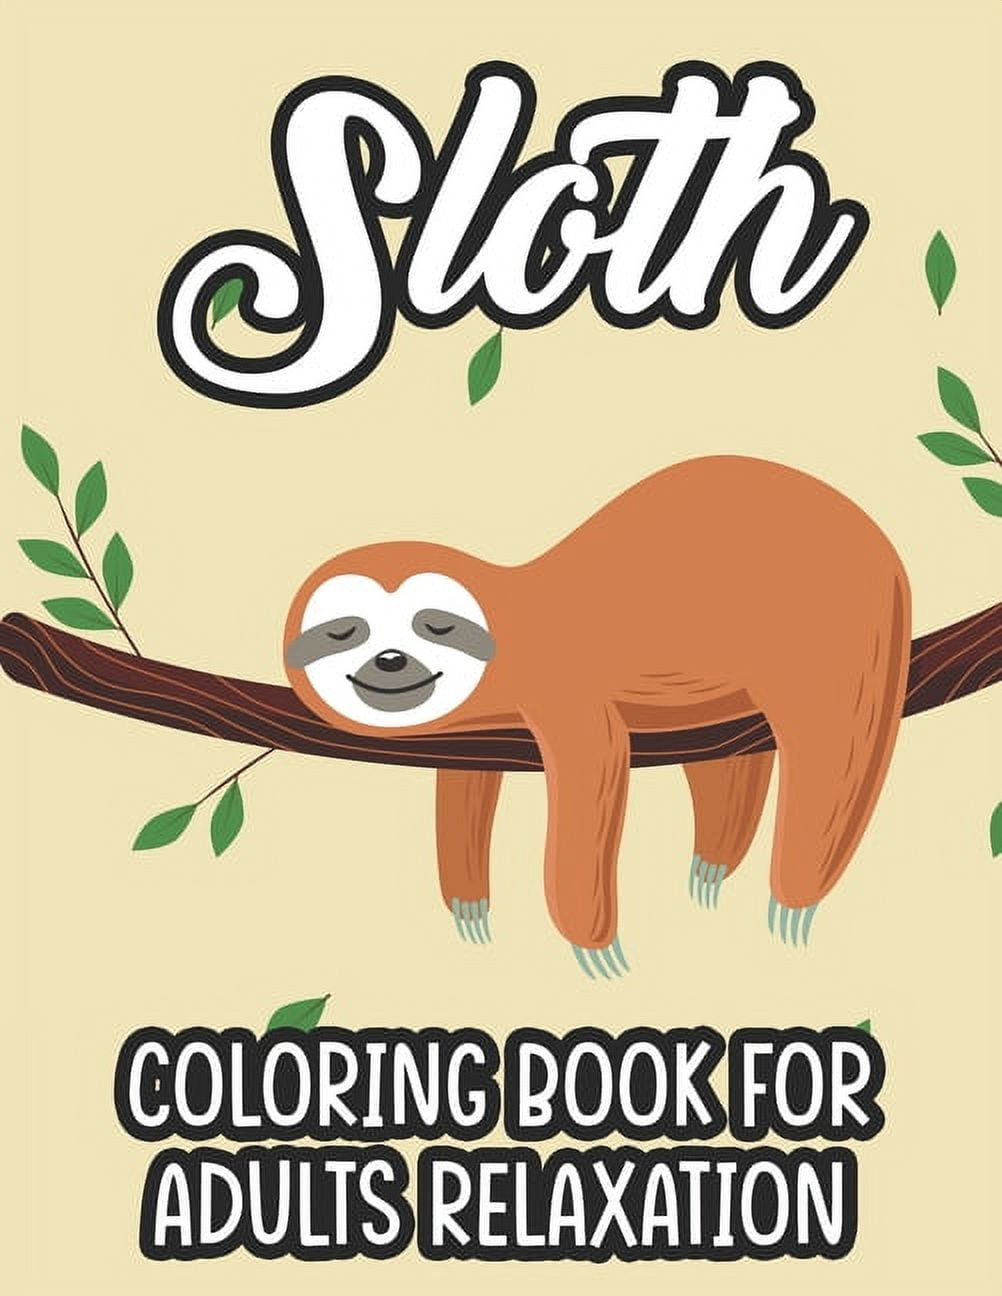 Sloth Coloring Book: A Great Sloth Coloring Book Adult, With